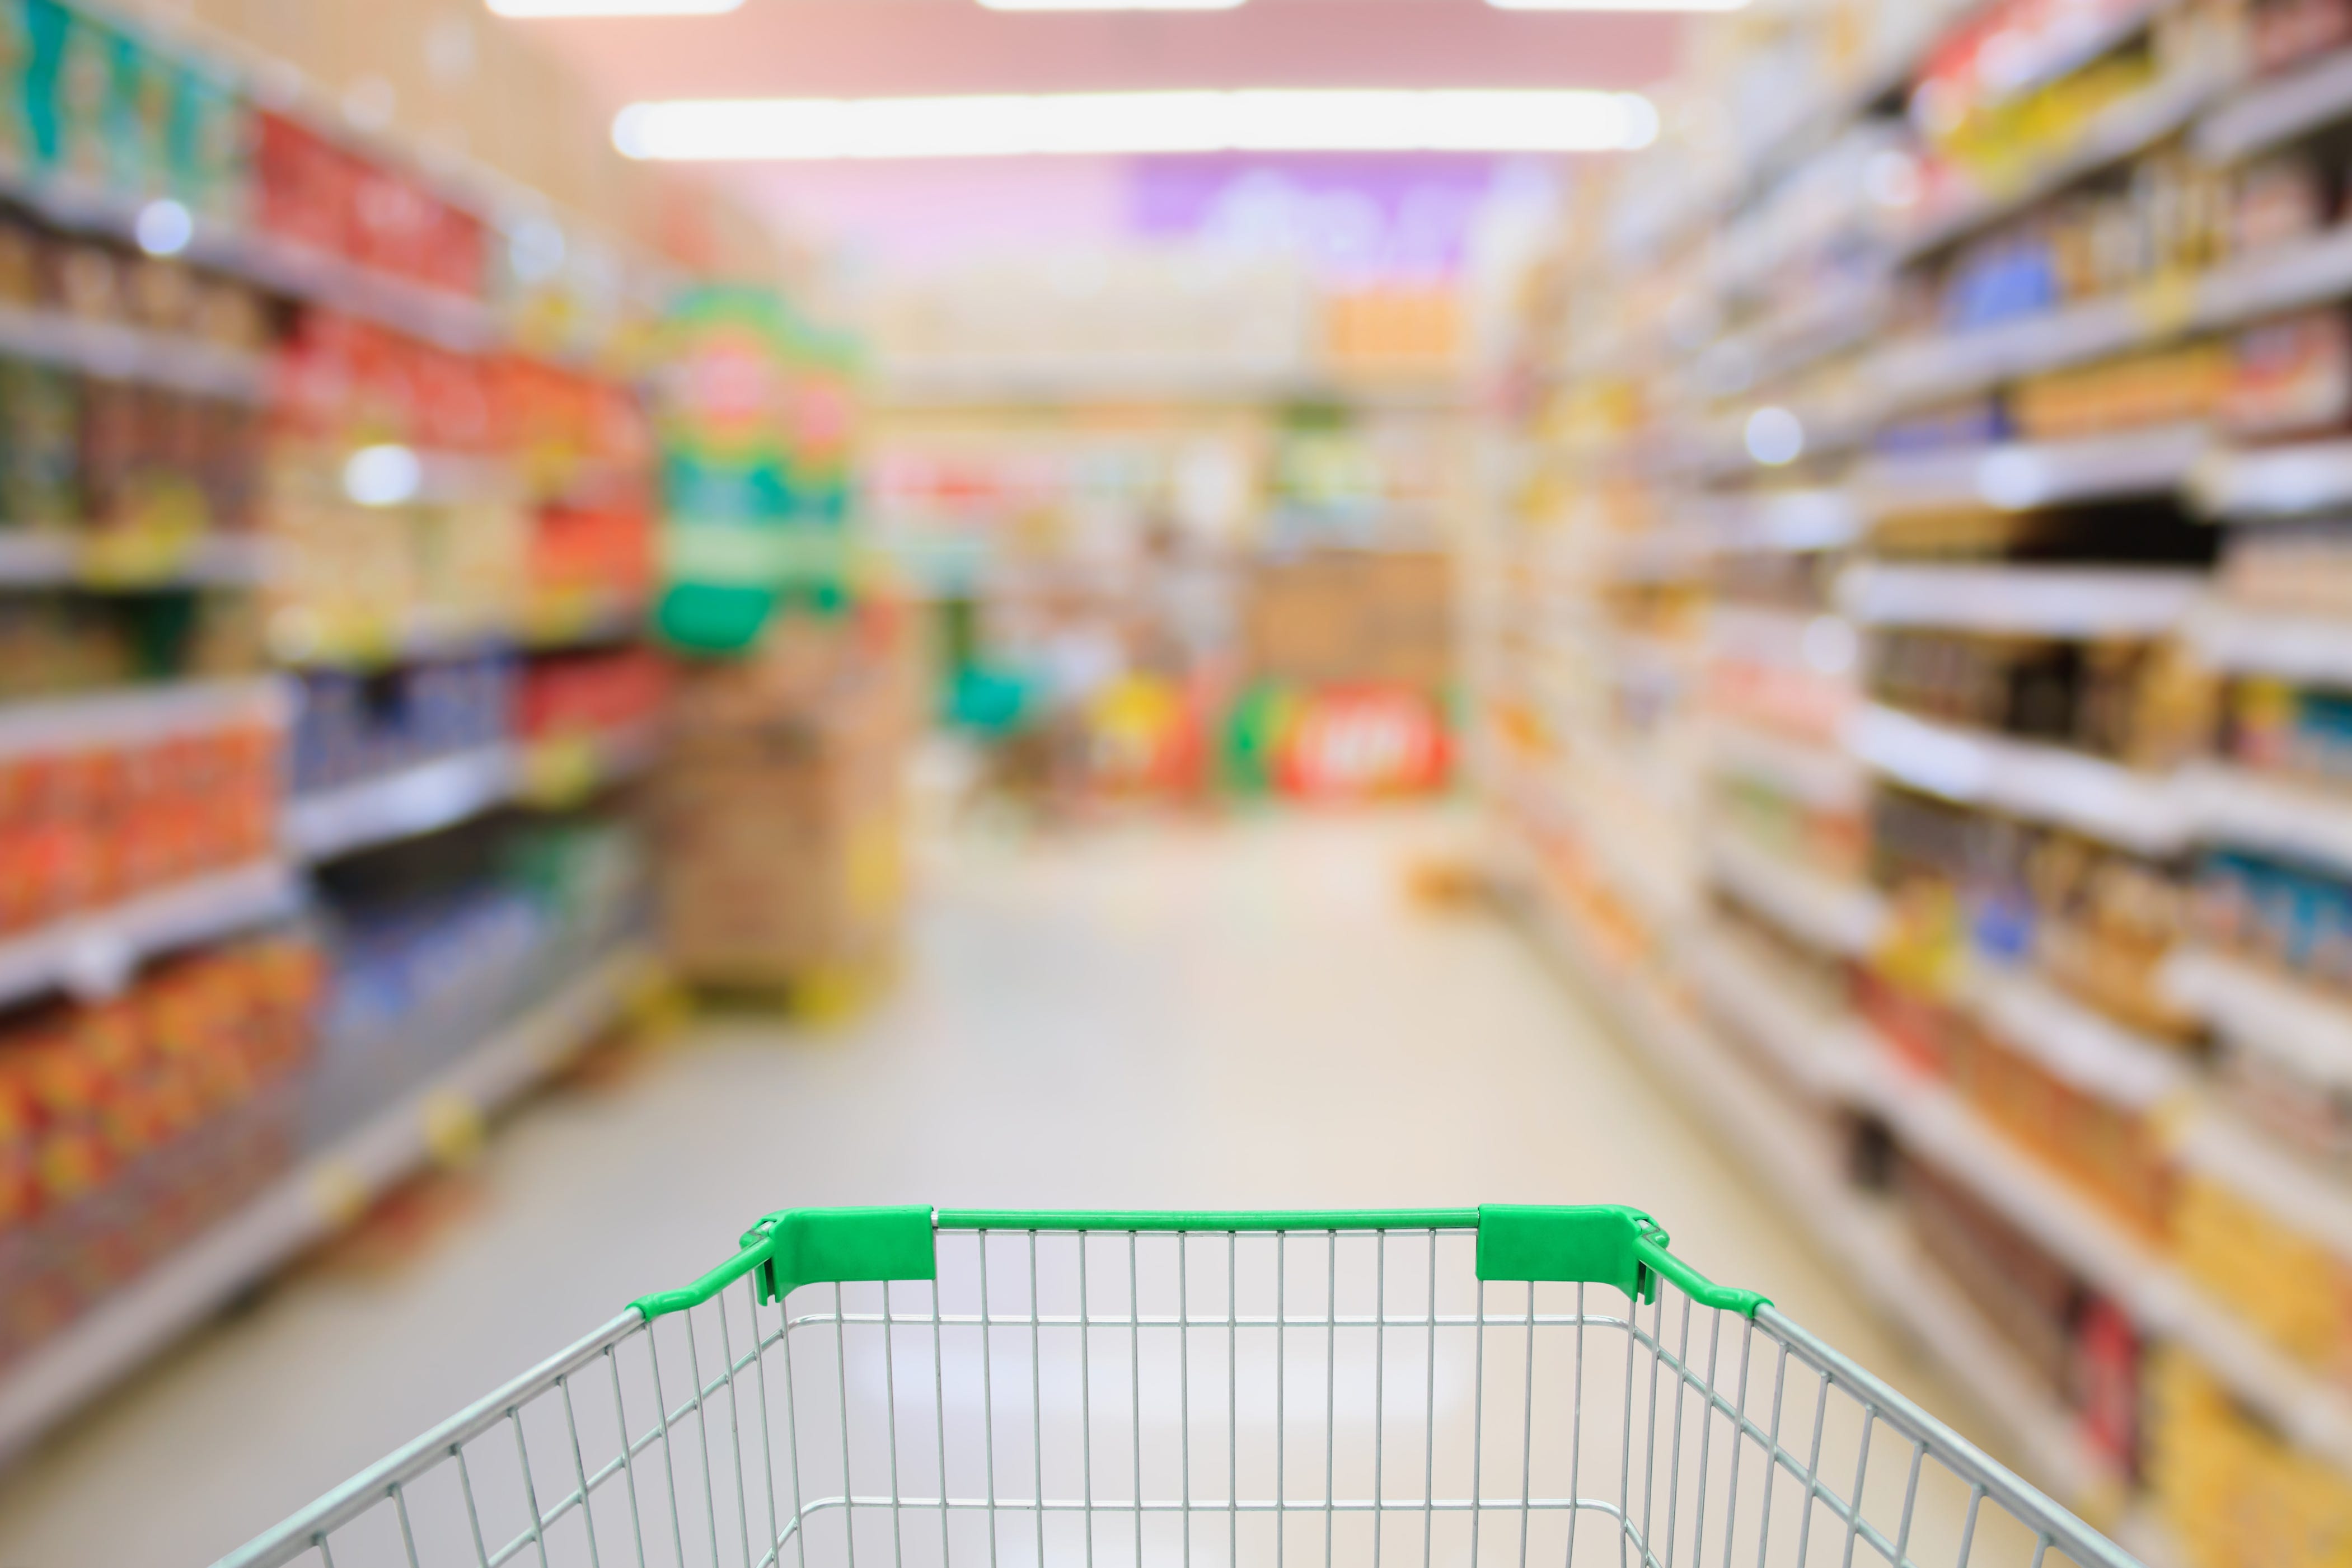 Want to cut your grocery bill in half? Take these 3 steps